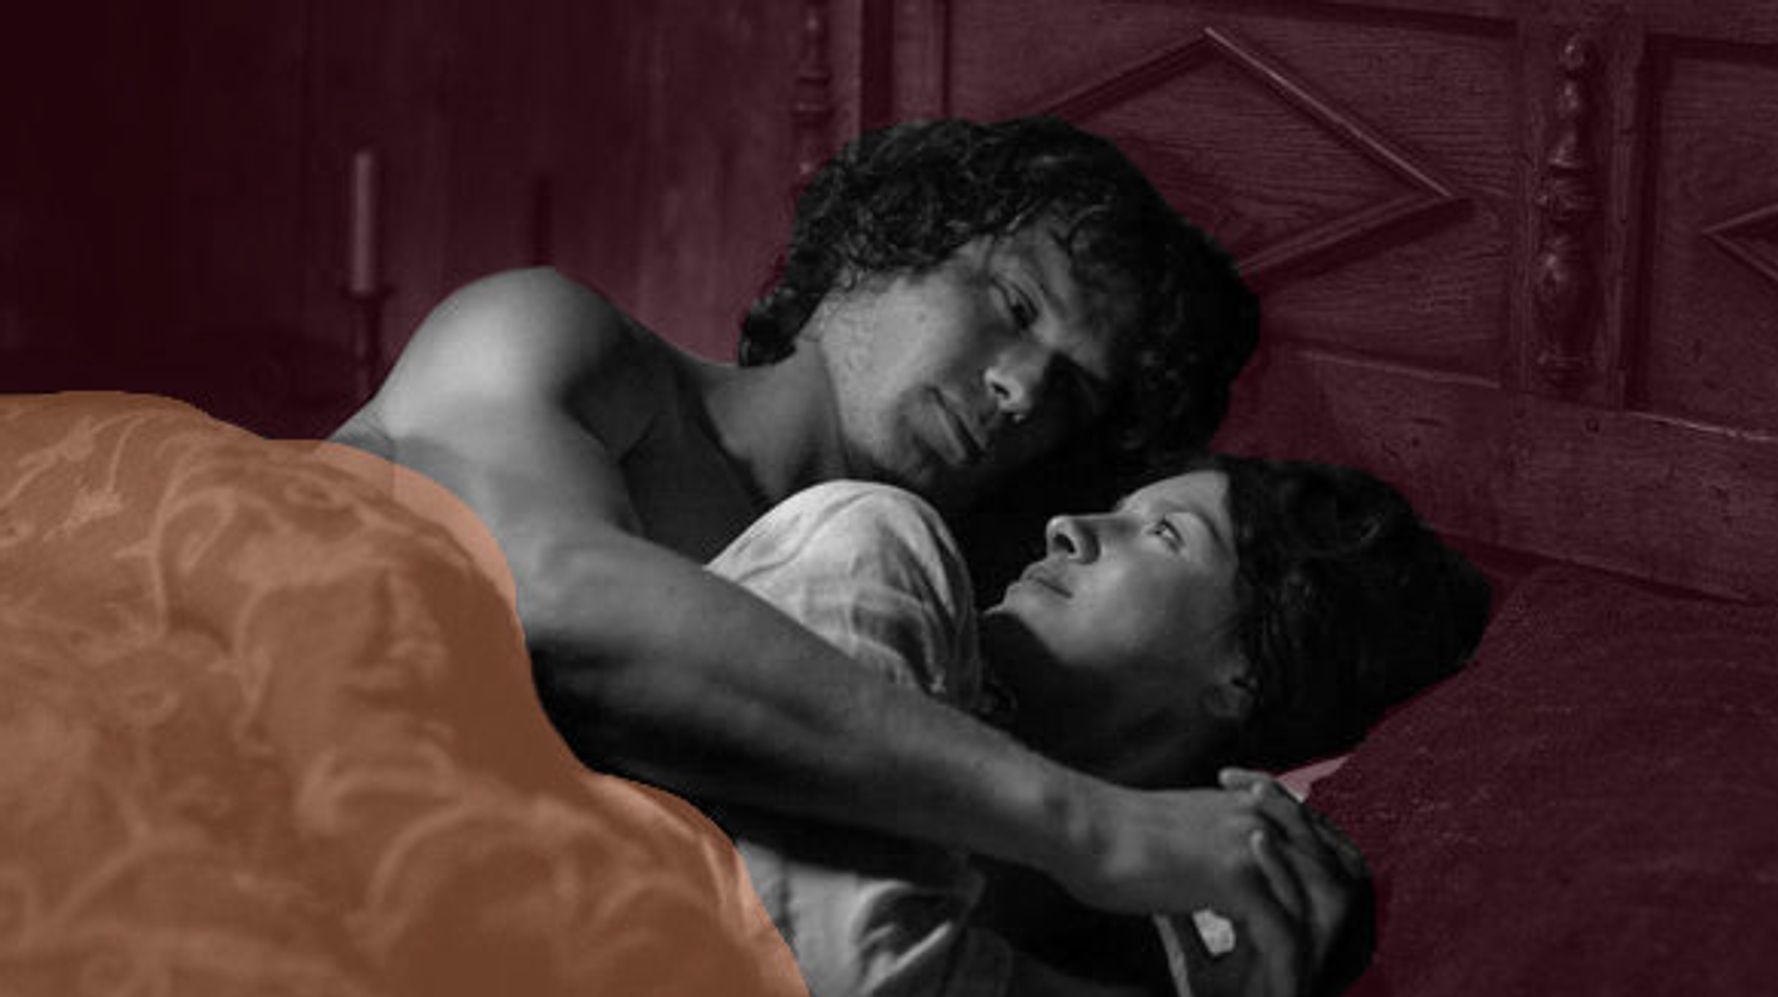 Horny Wet Teen Amateur - Outlander' Is The Official TV Show Of Frisky Couples Who Just Want To F**k  | HuffPost Entertainment